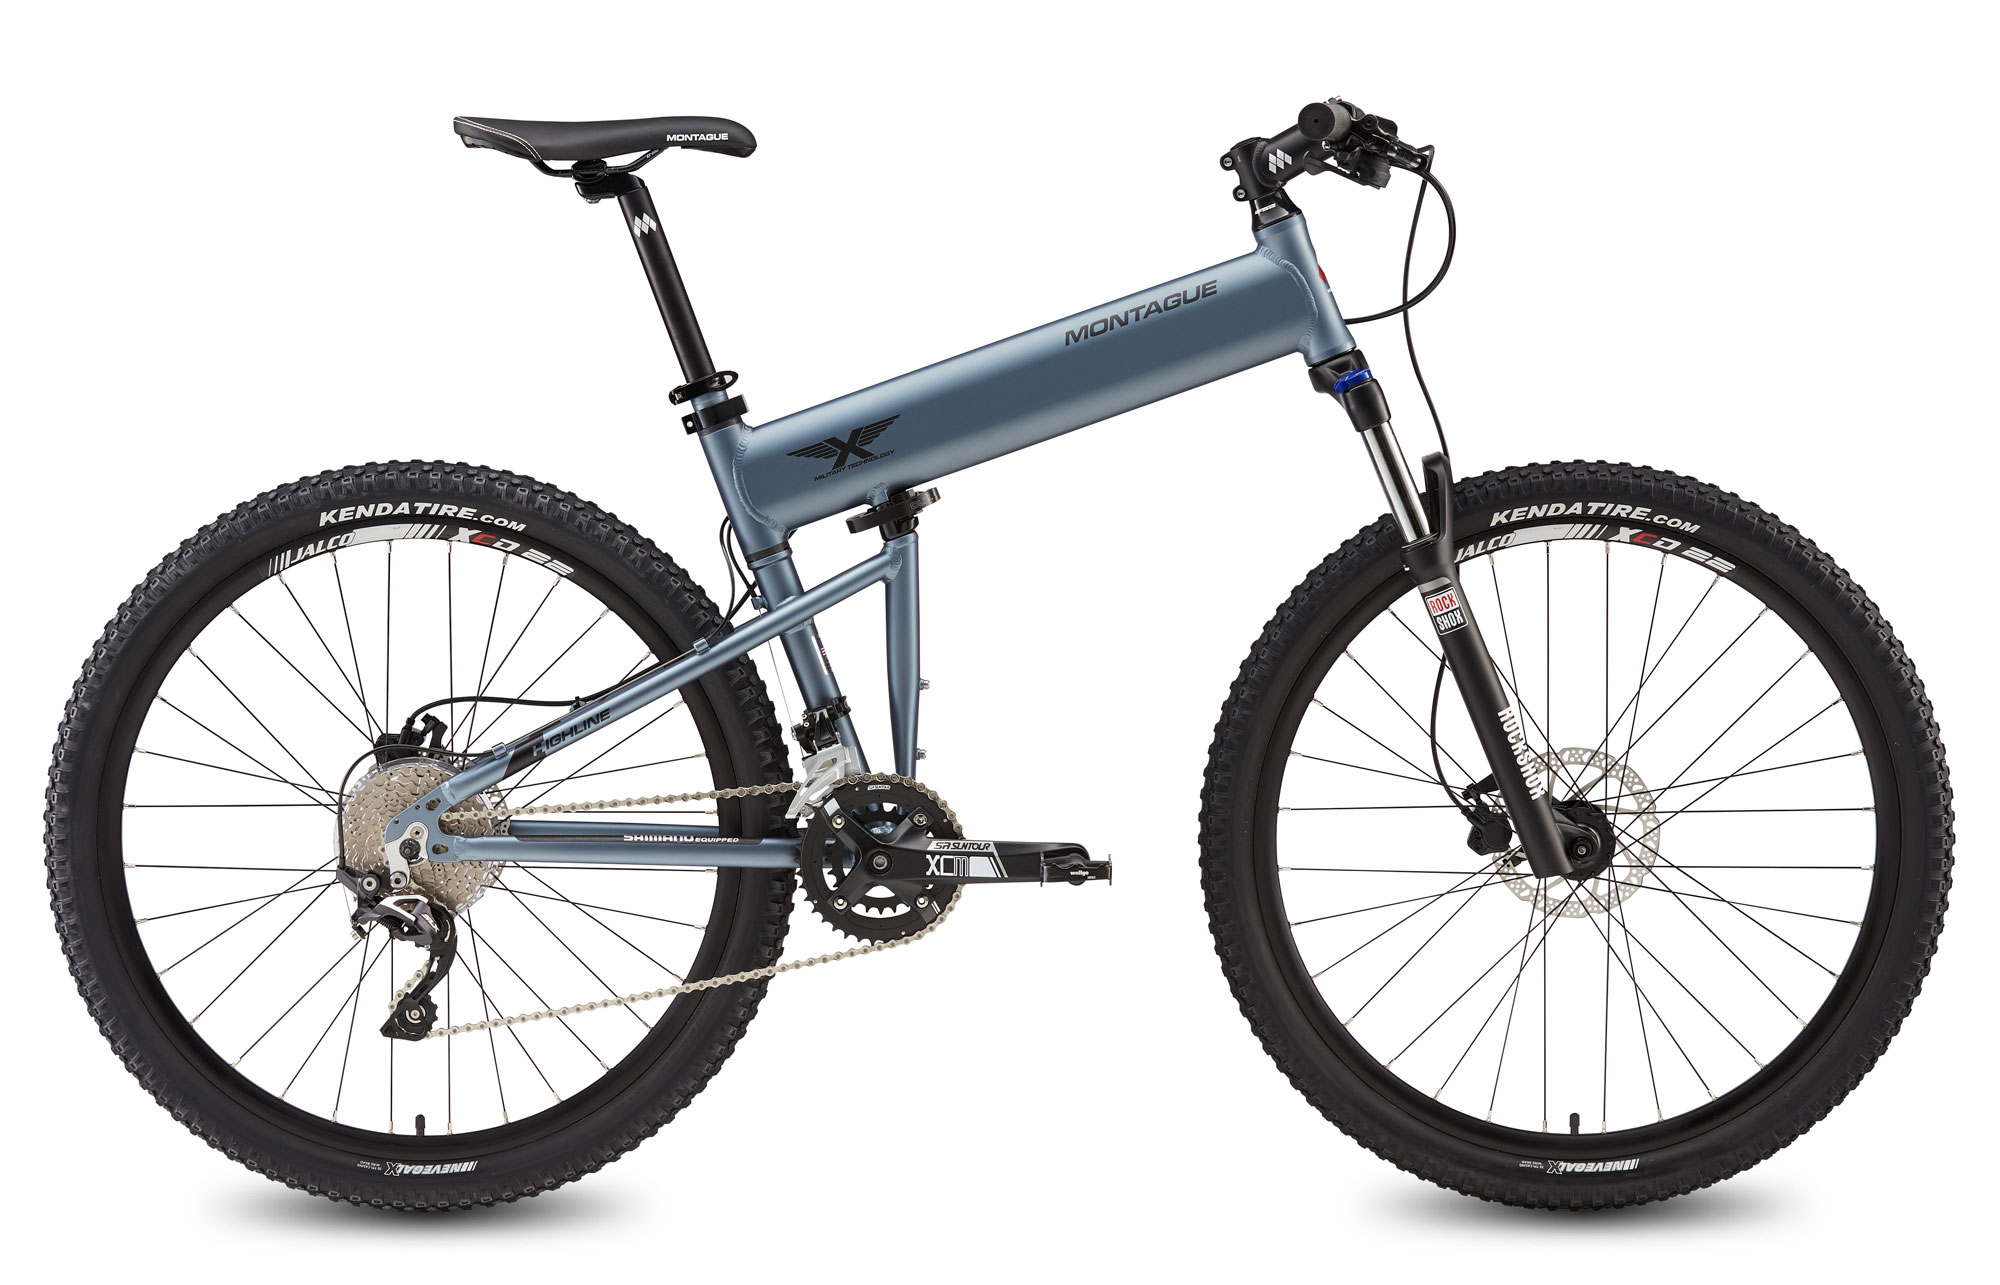 foldable mountain bicycle